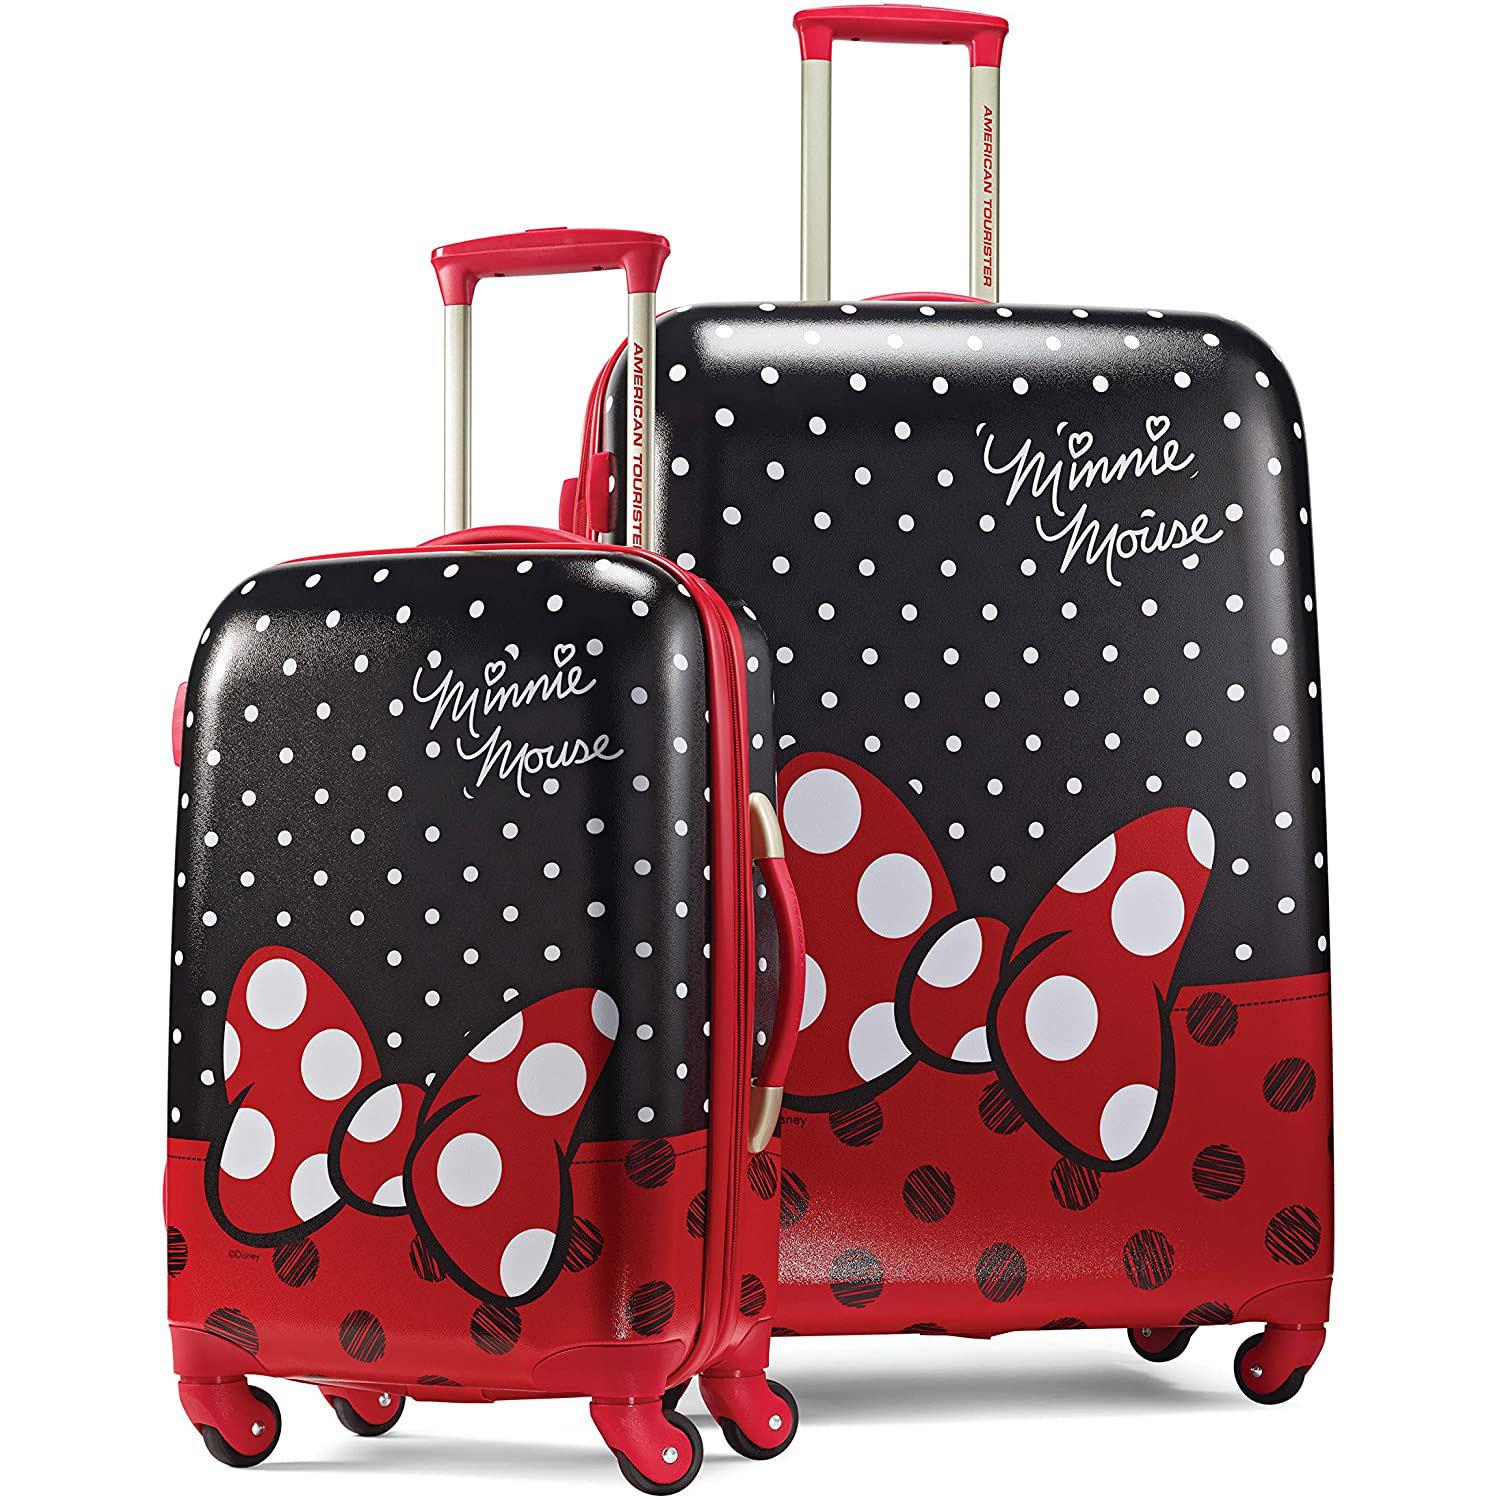 American Tourister Disney Hardside Luggage 2-Piece Set for $209.99 Shipped